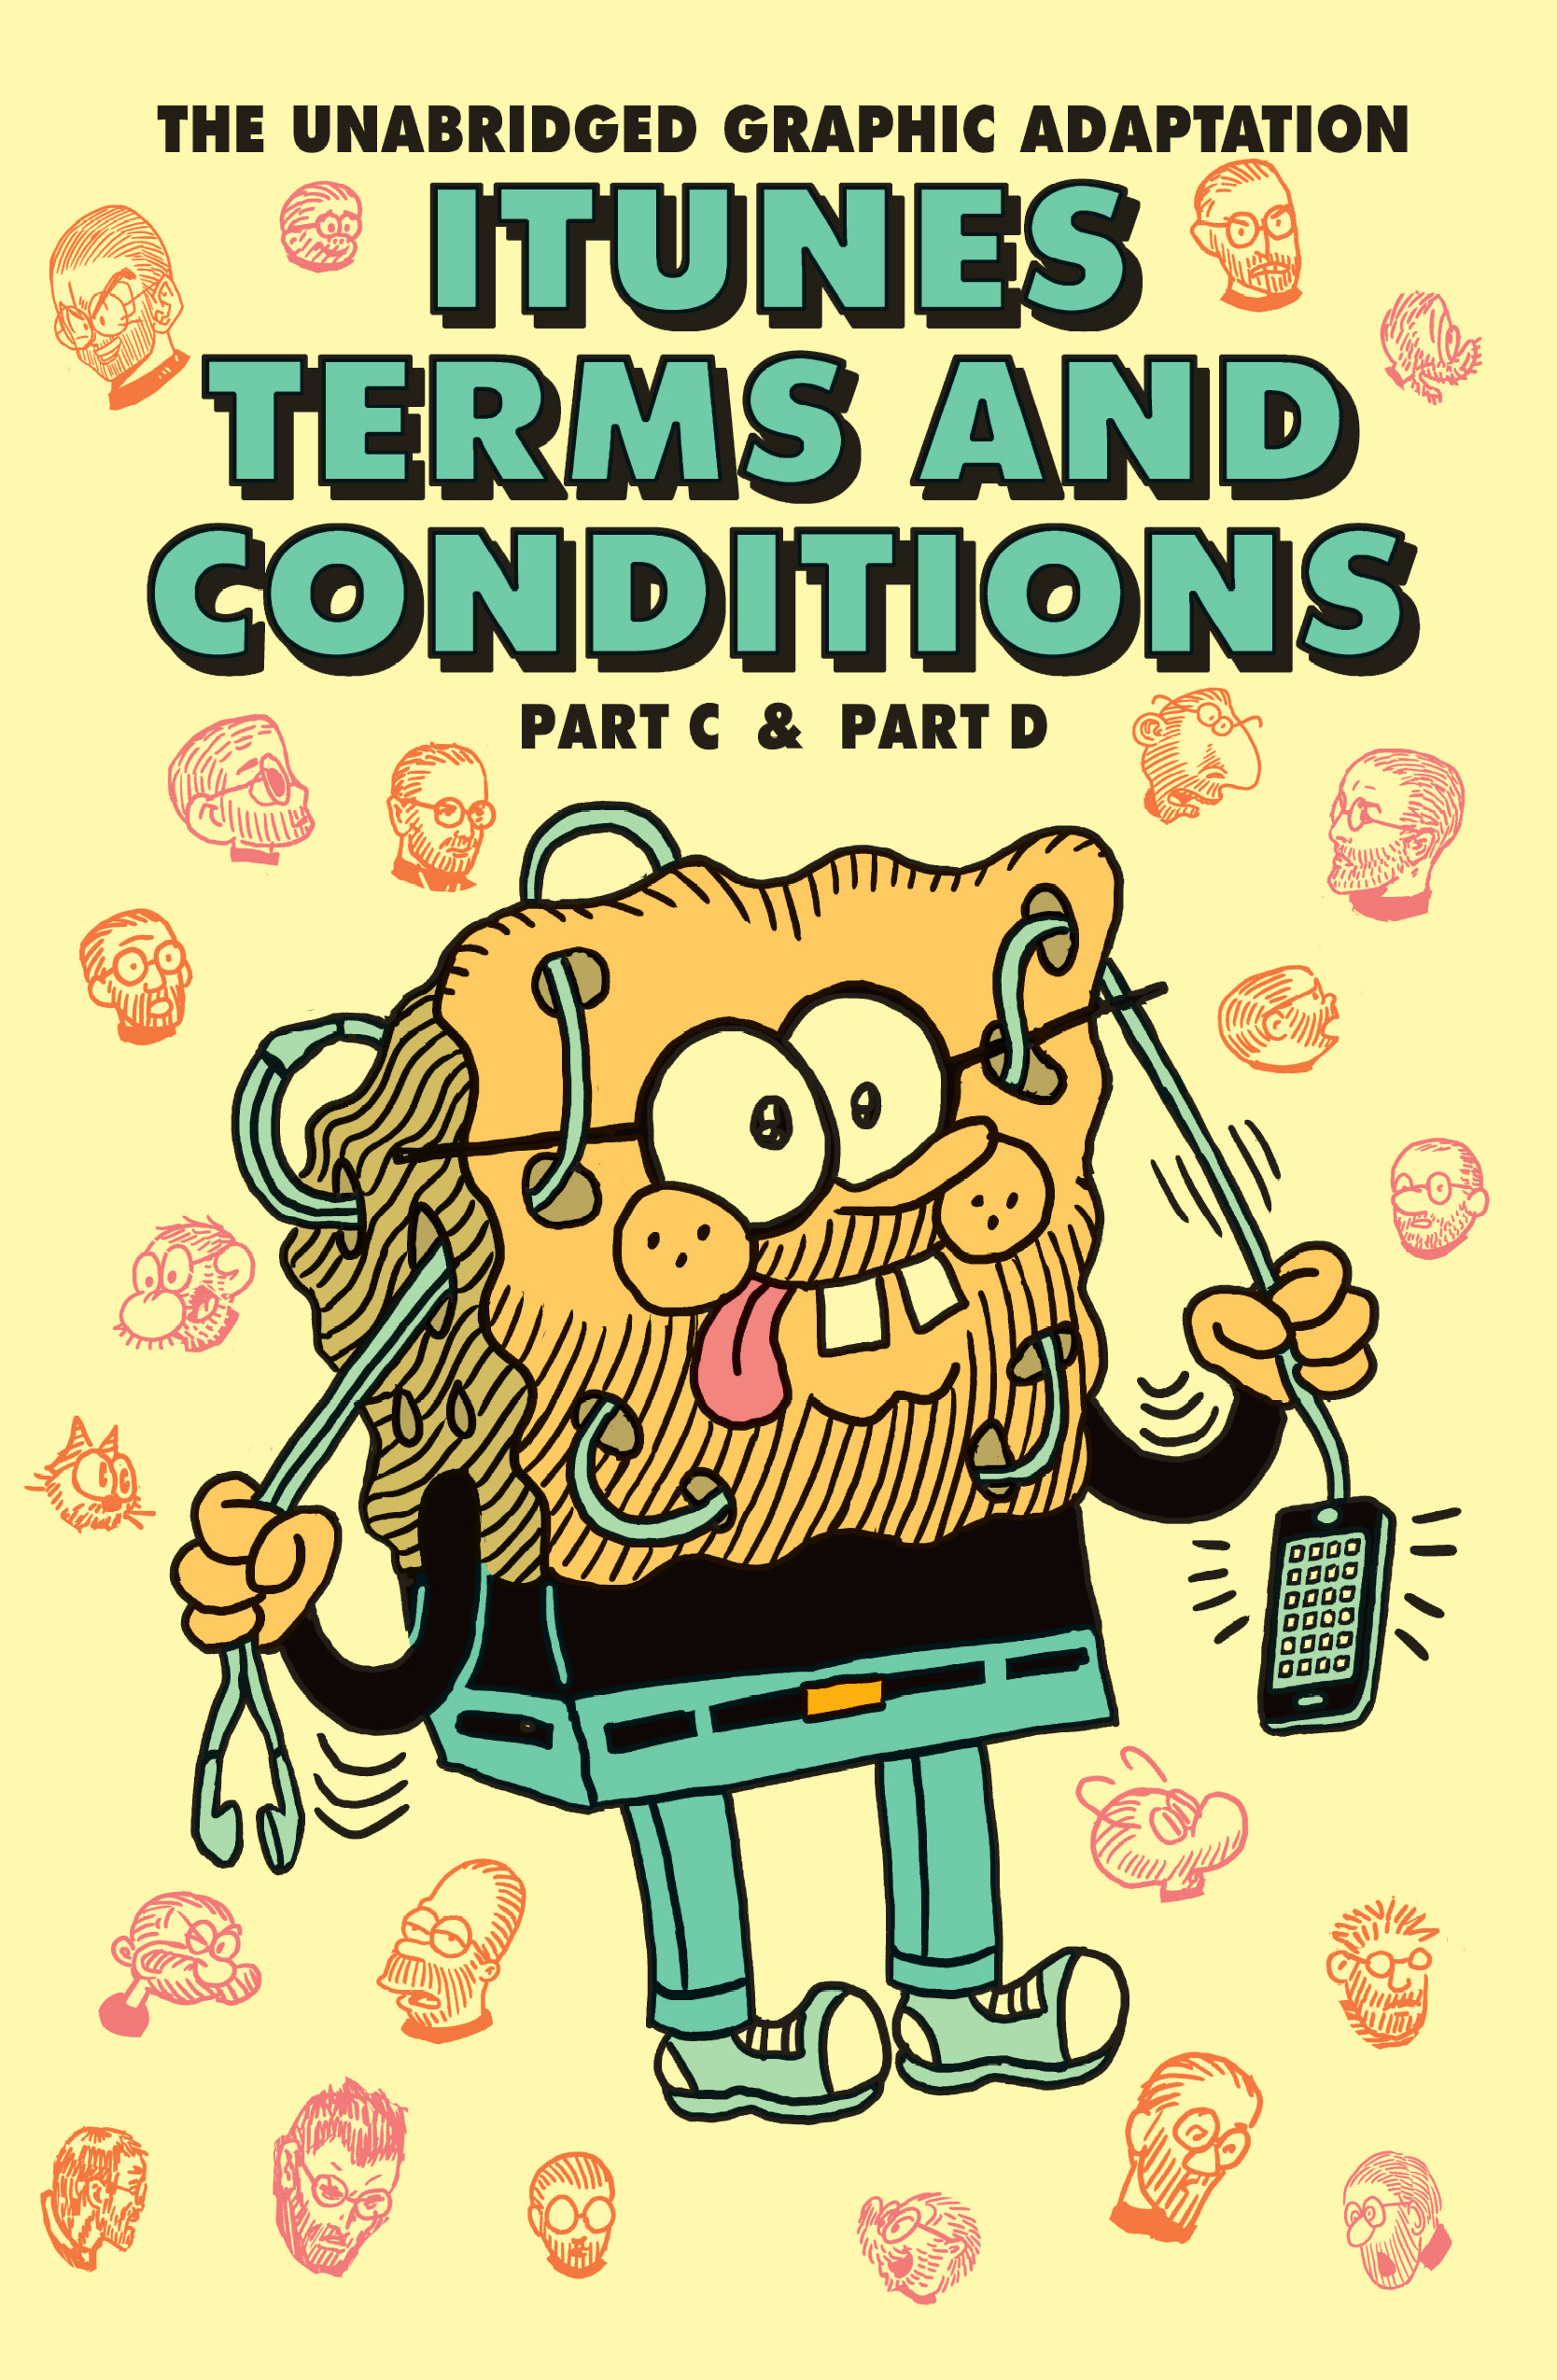 The iTunes Terms &amp; Conditions as Graphic Novels Starring Steve Jobs [Comic]